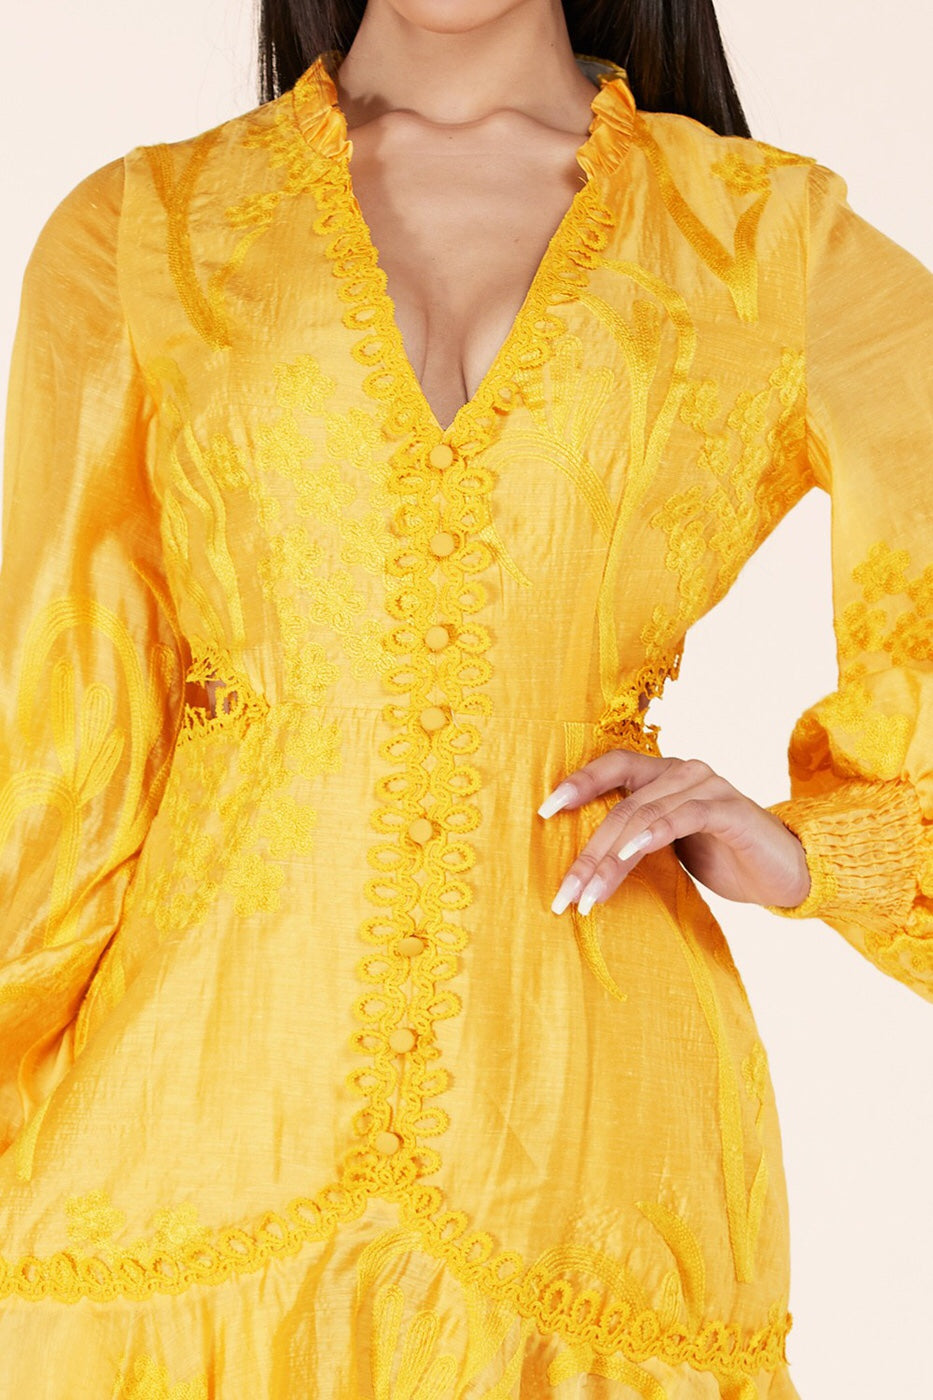 Beautiful Golden Mustard Embroidered Woman’s Fashion